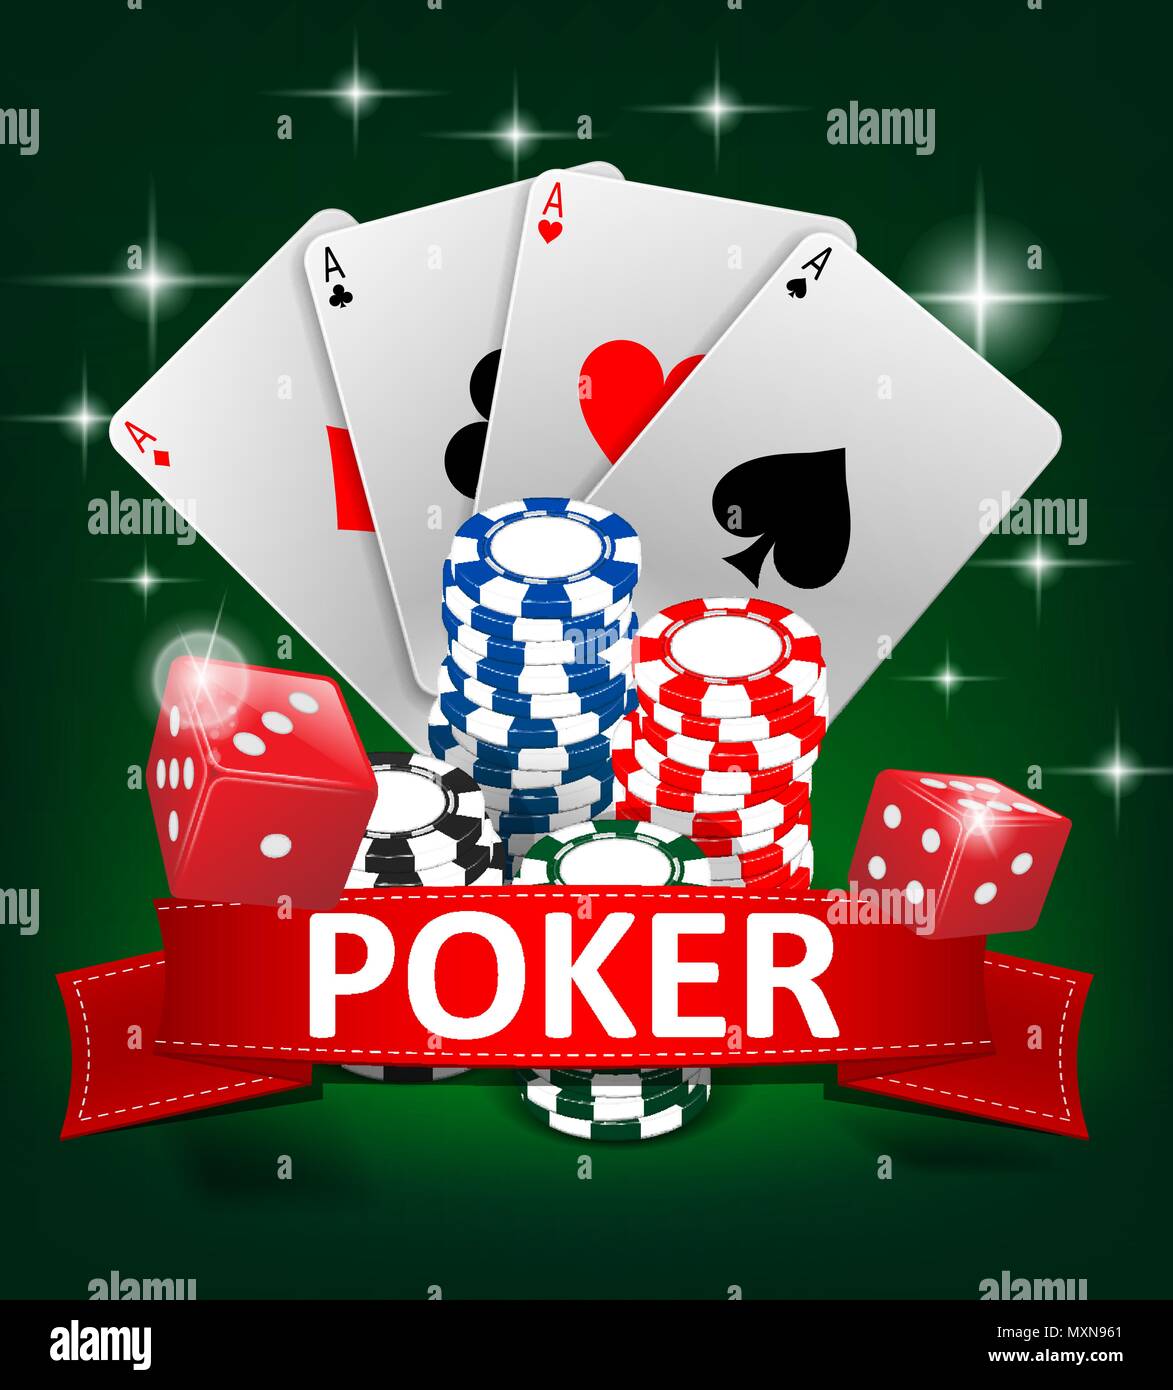 What Is poker online and How Does It Work?